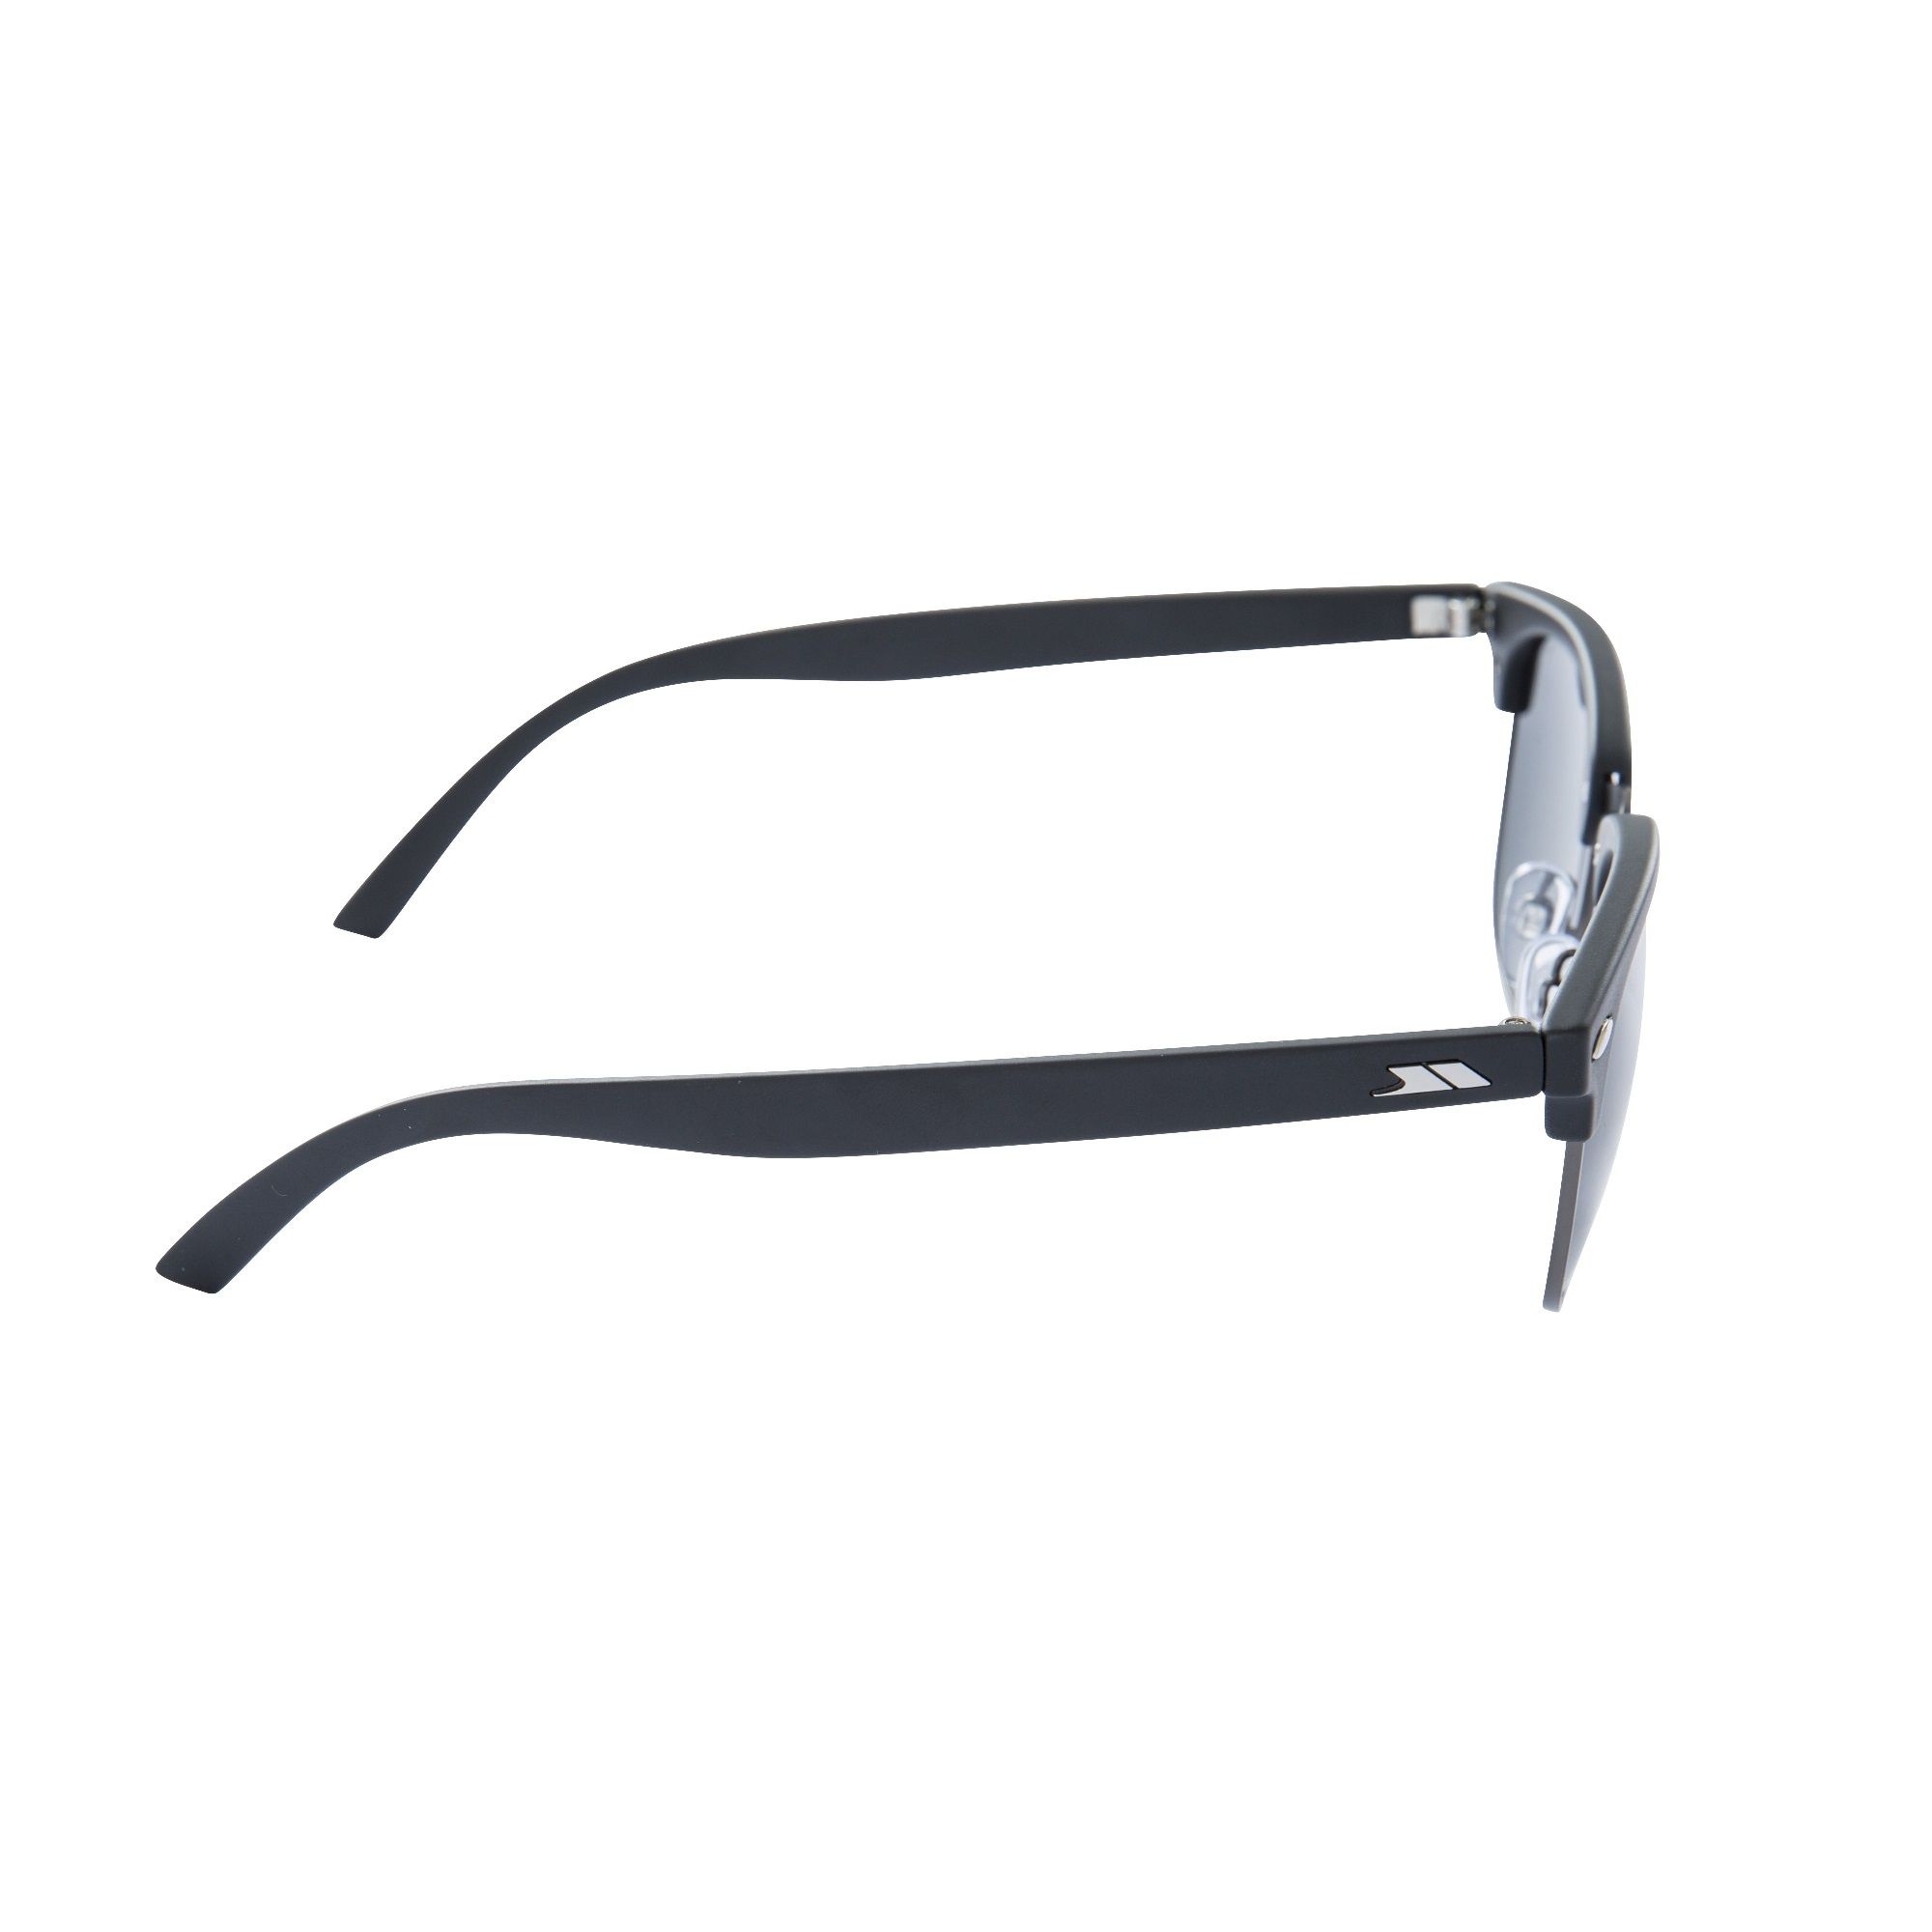 Material: polycarbonate frame, metallic trim. Solid smoke category 3 lens. Cleaning cloth bag.  UV 400 Protection. Conforms to EN I SO 12312-1-2013.